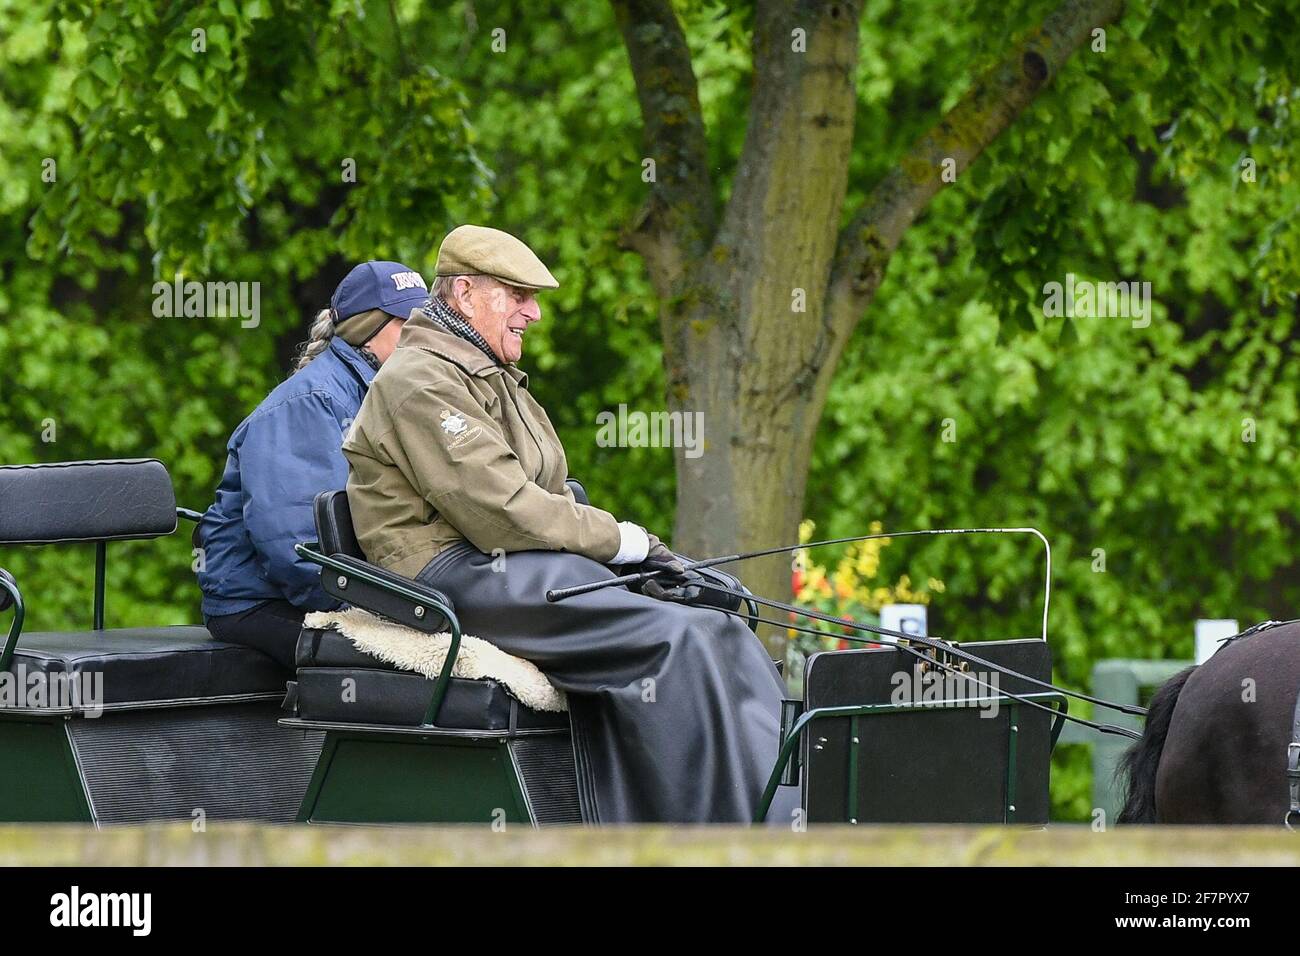 Prince Philip, Duke of Edinburgh watching Lady Louise Windsor during the Royal Windsor Horse Show held in the private grounds of Windsor Castle in Berkshire in the UK between on 8th-12th May 2019 Credit: Peter Putnam/Alamy Live News Stock Photo